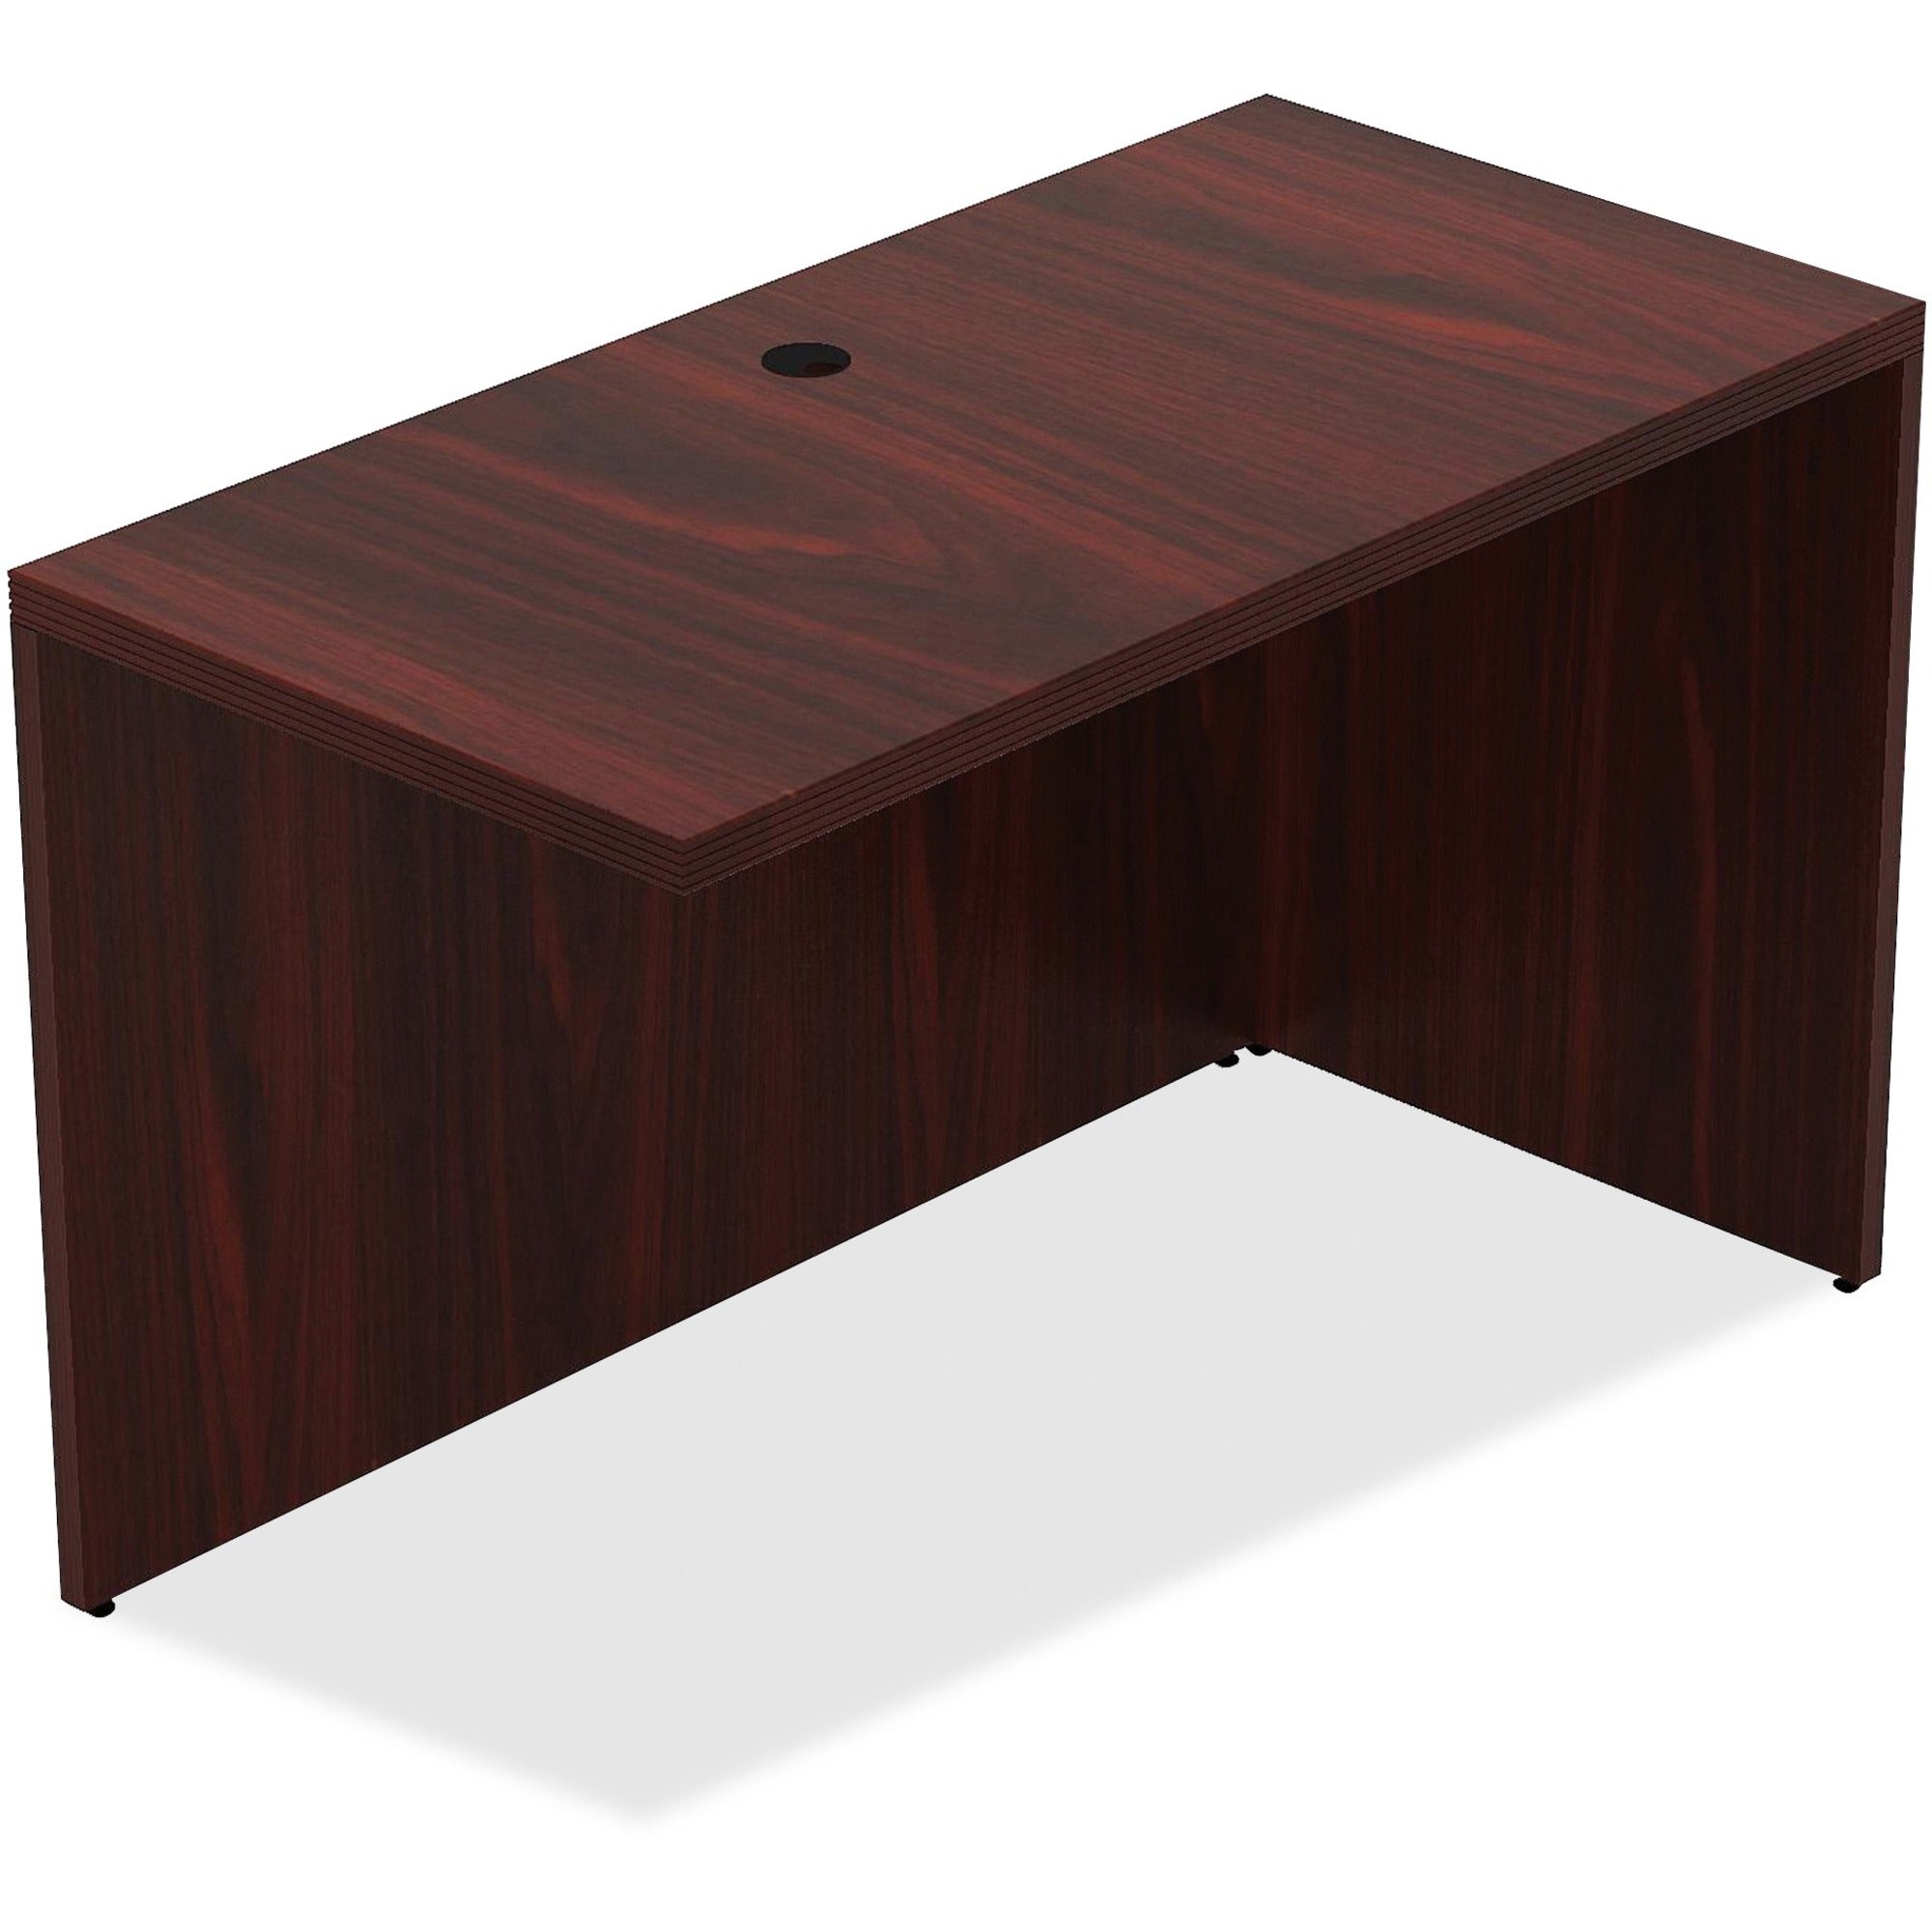 Lorell Chateau Series Return - 47.3" x 23.6"30" Desk, 1.5" Top - Reeded Edge - Material: P2 Particleboard - Finish: Mahogany, Laminate - Durable, Modesty Panel, Grommet, Cord Management - For Office - 